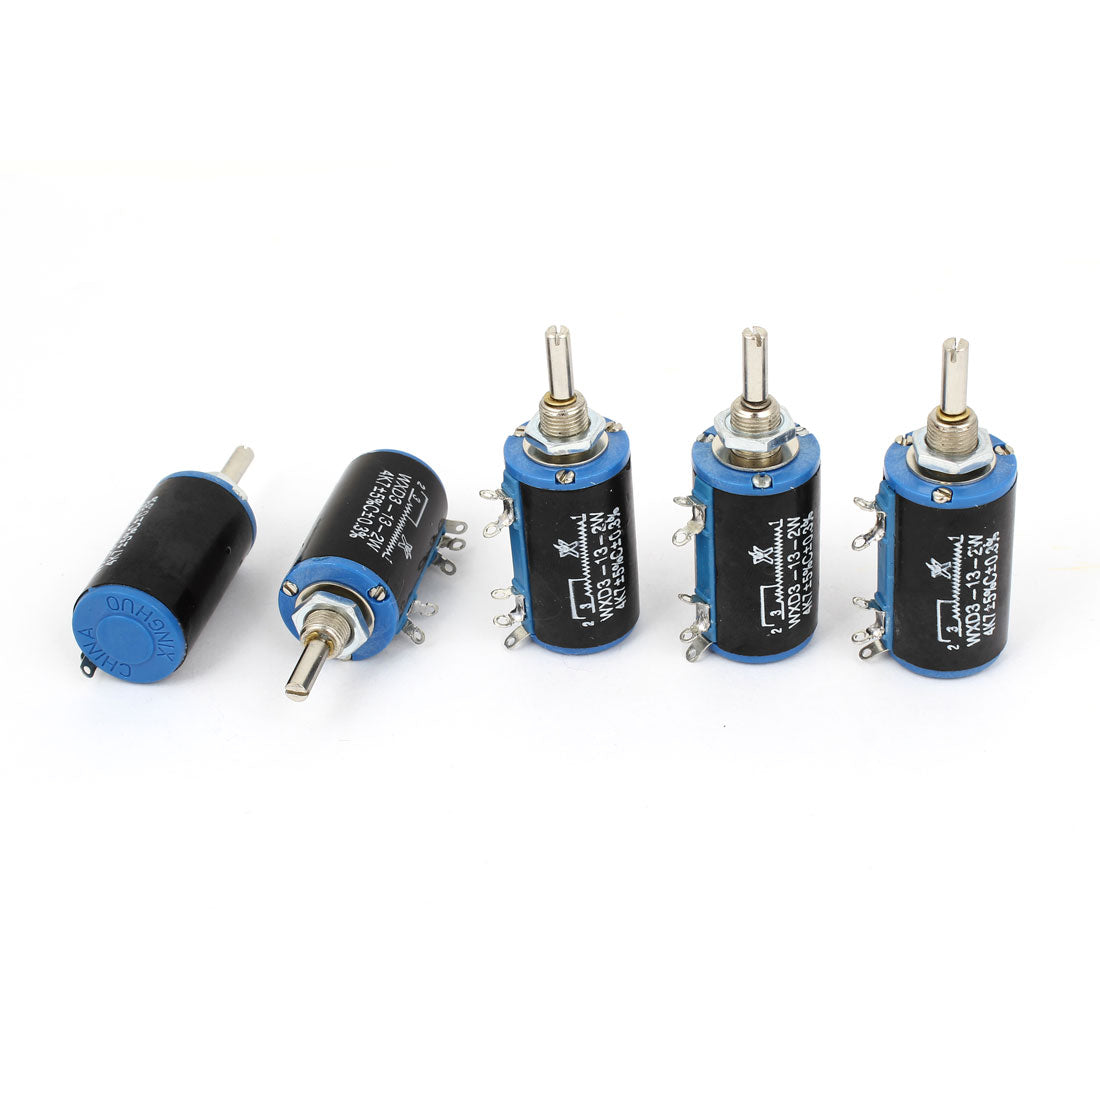 uxcell Uxcell WXD3-13 4.7K ohm 2W 4 Pin Terminals 10 Turn Wire Wound Potentiometer 5pcs